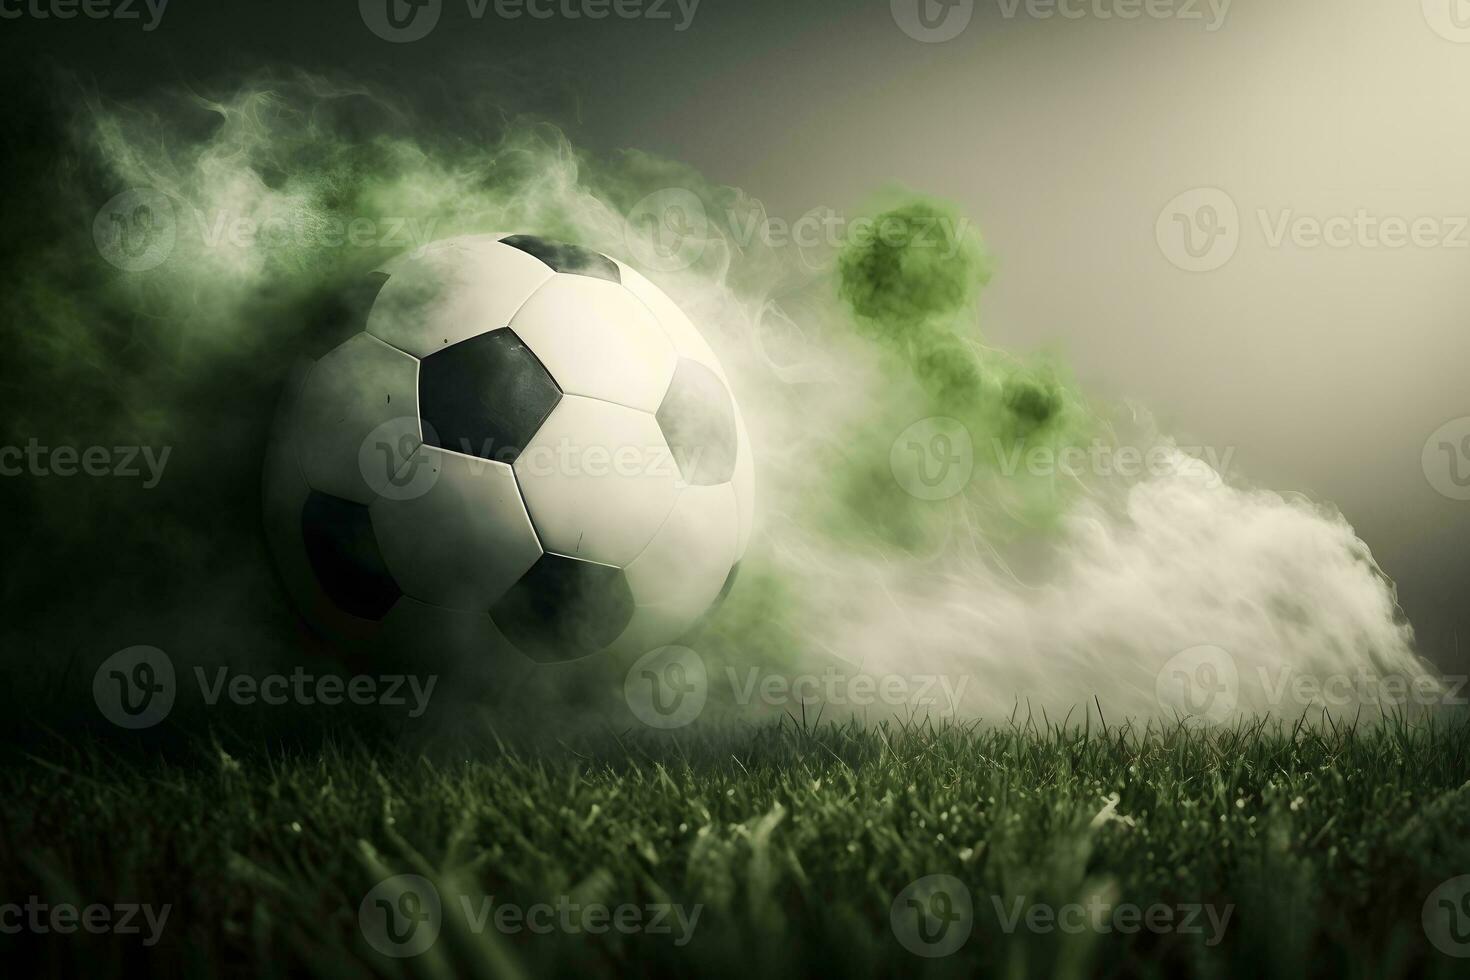 Traditional soccer ball on soccer field on green grass with dark toned foggy background. Neural network generated art photo